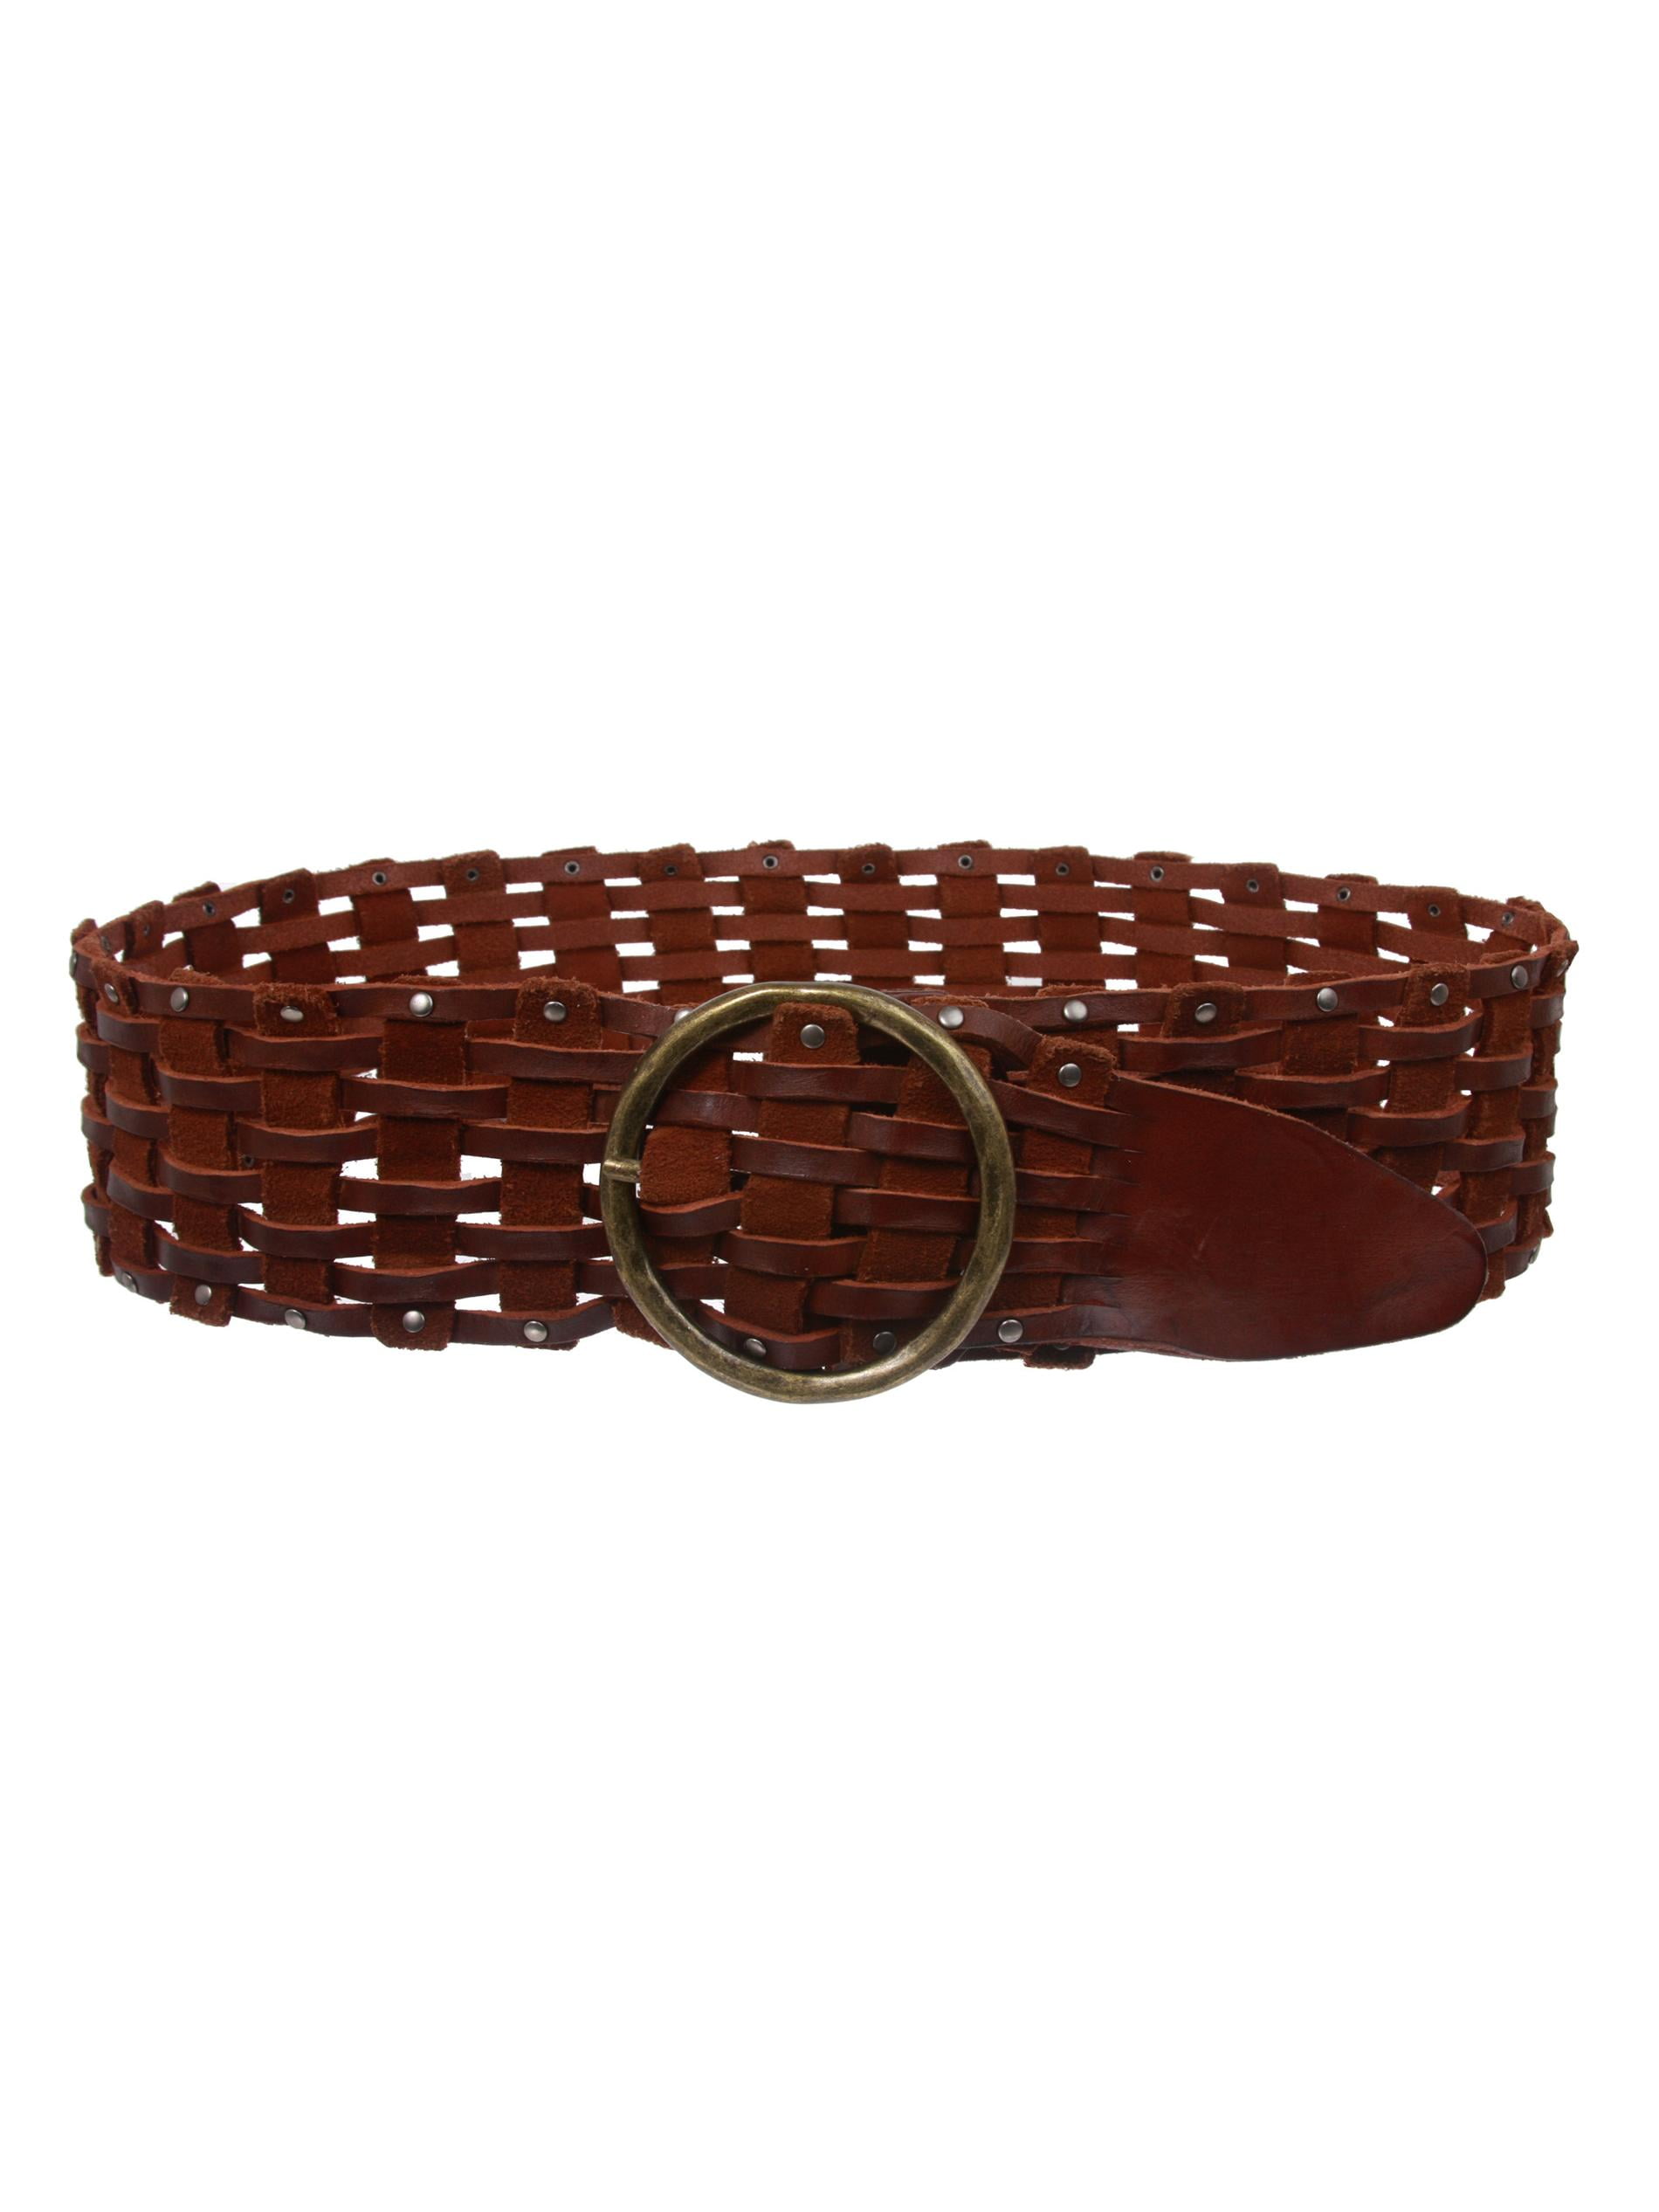 Womens 3 Wide Perforated Waist Braided Woven Solid Vintage Leather Round Belt